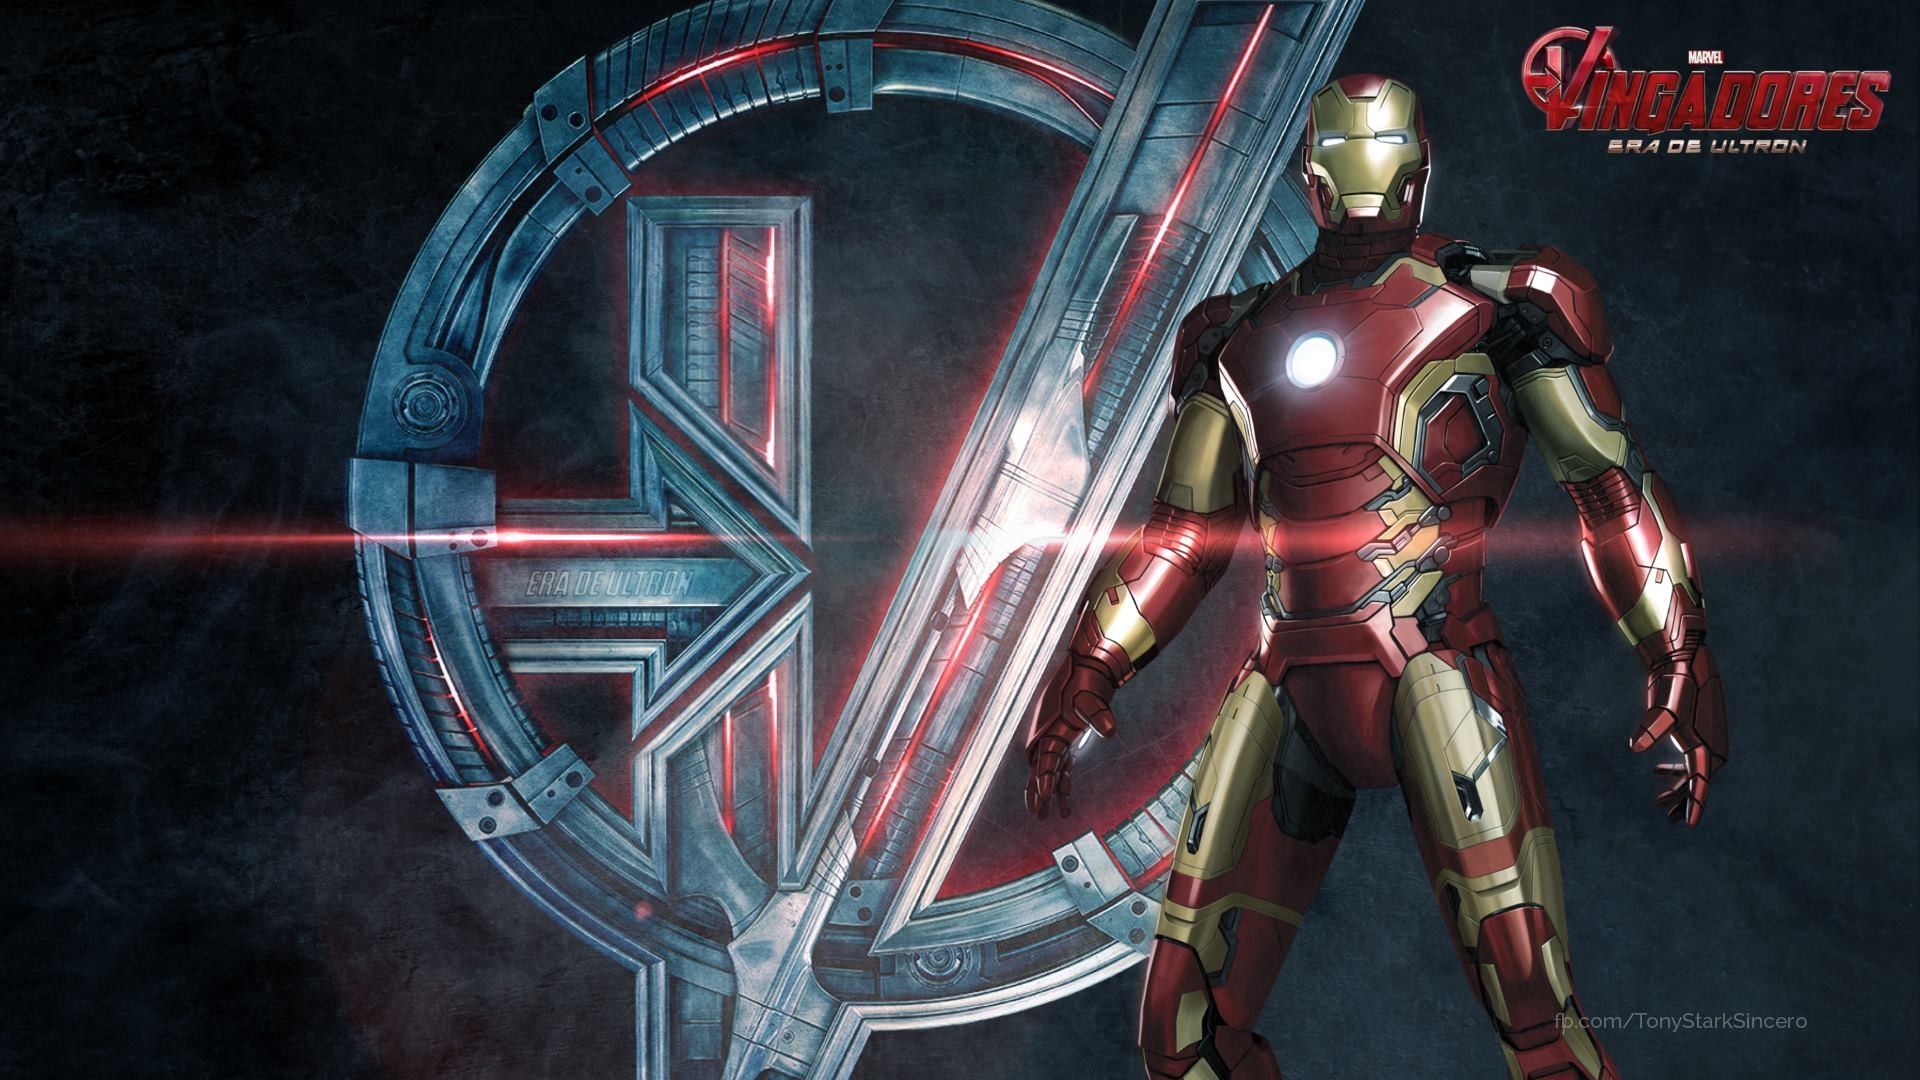 1920x1080 Avengers_Age of Ultron_Character Wallpapers (1)